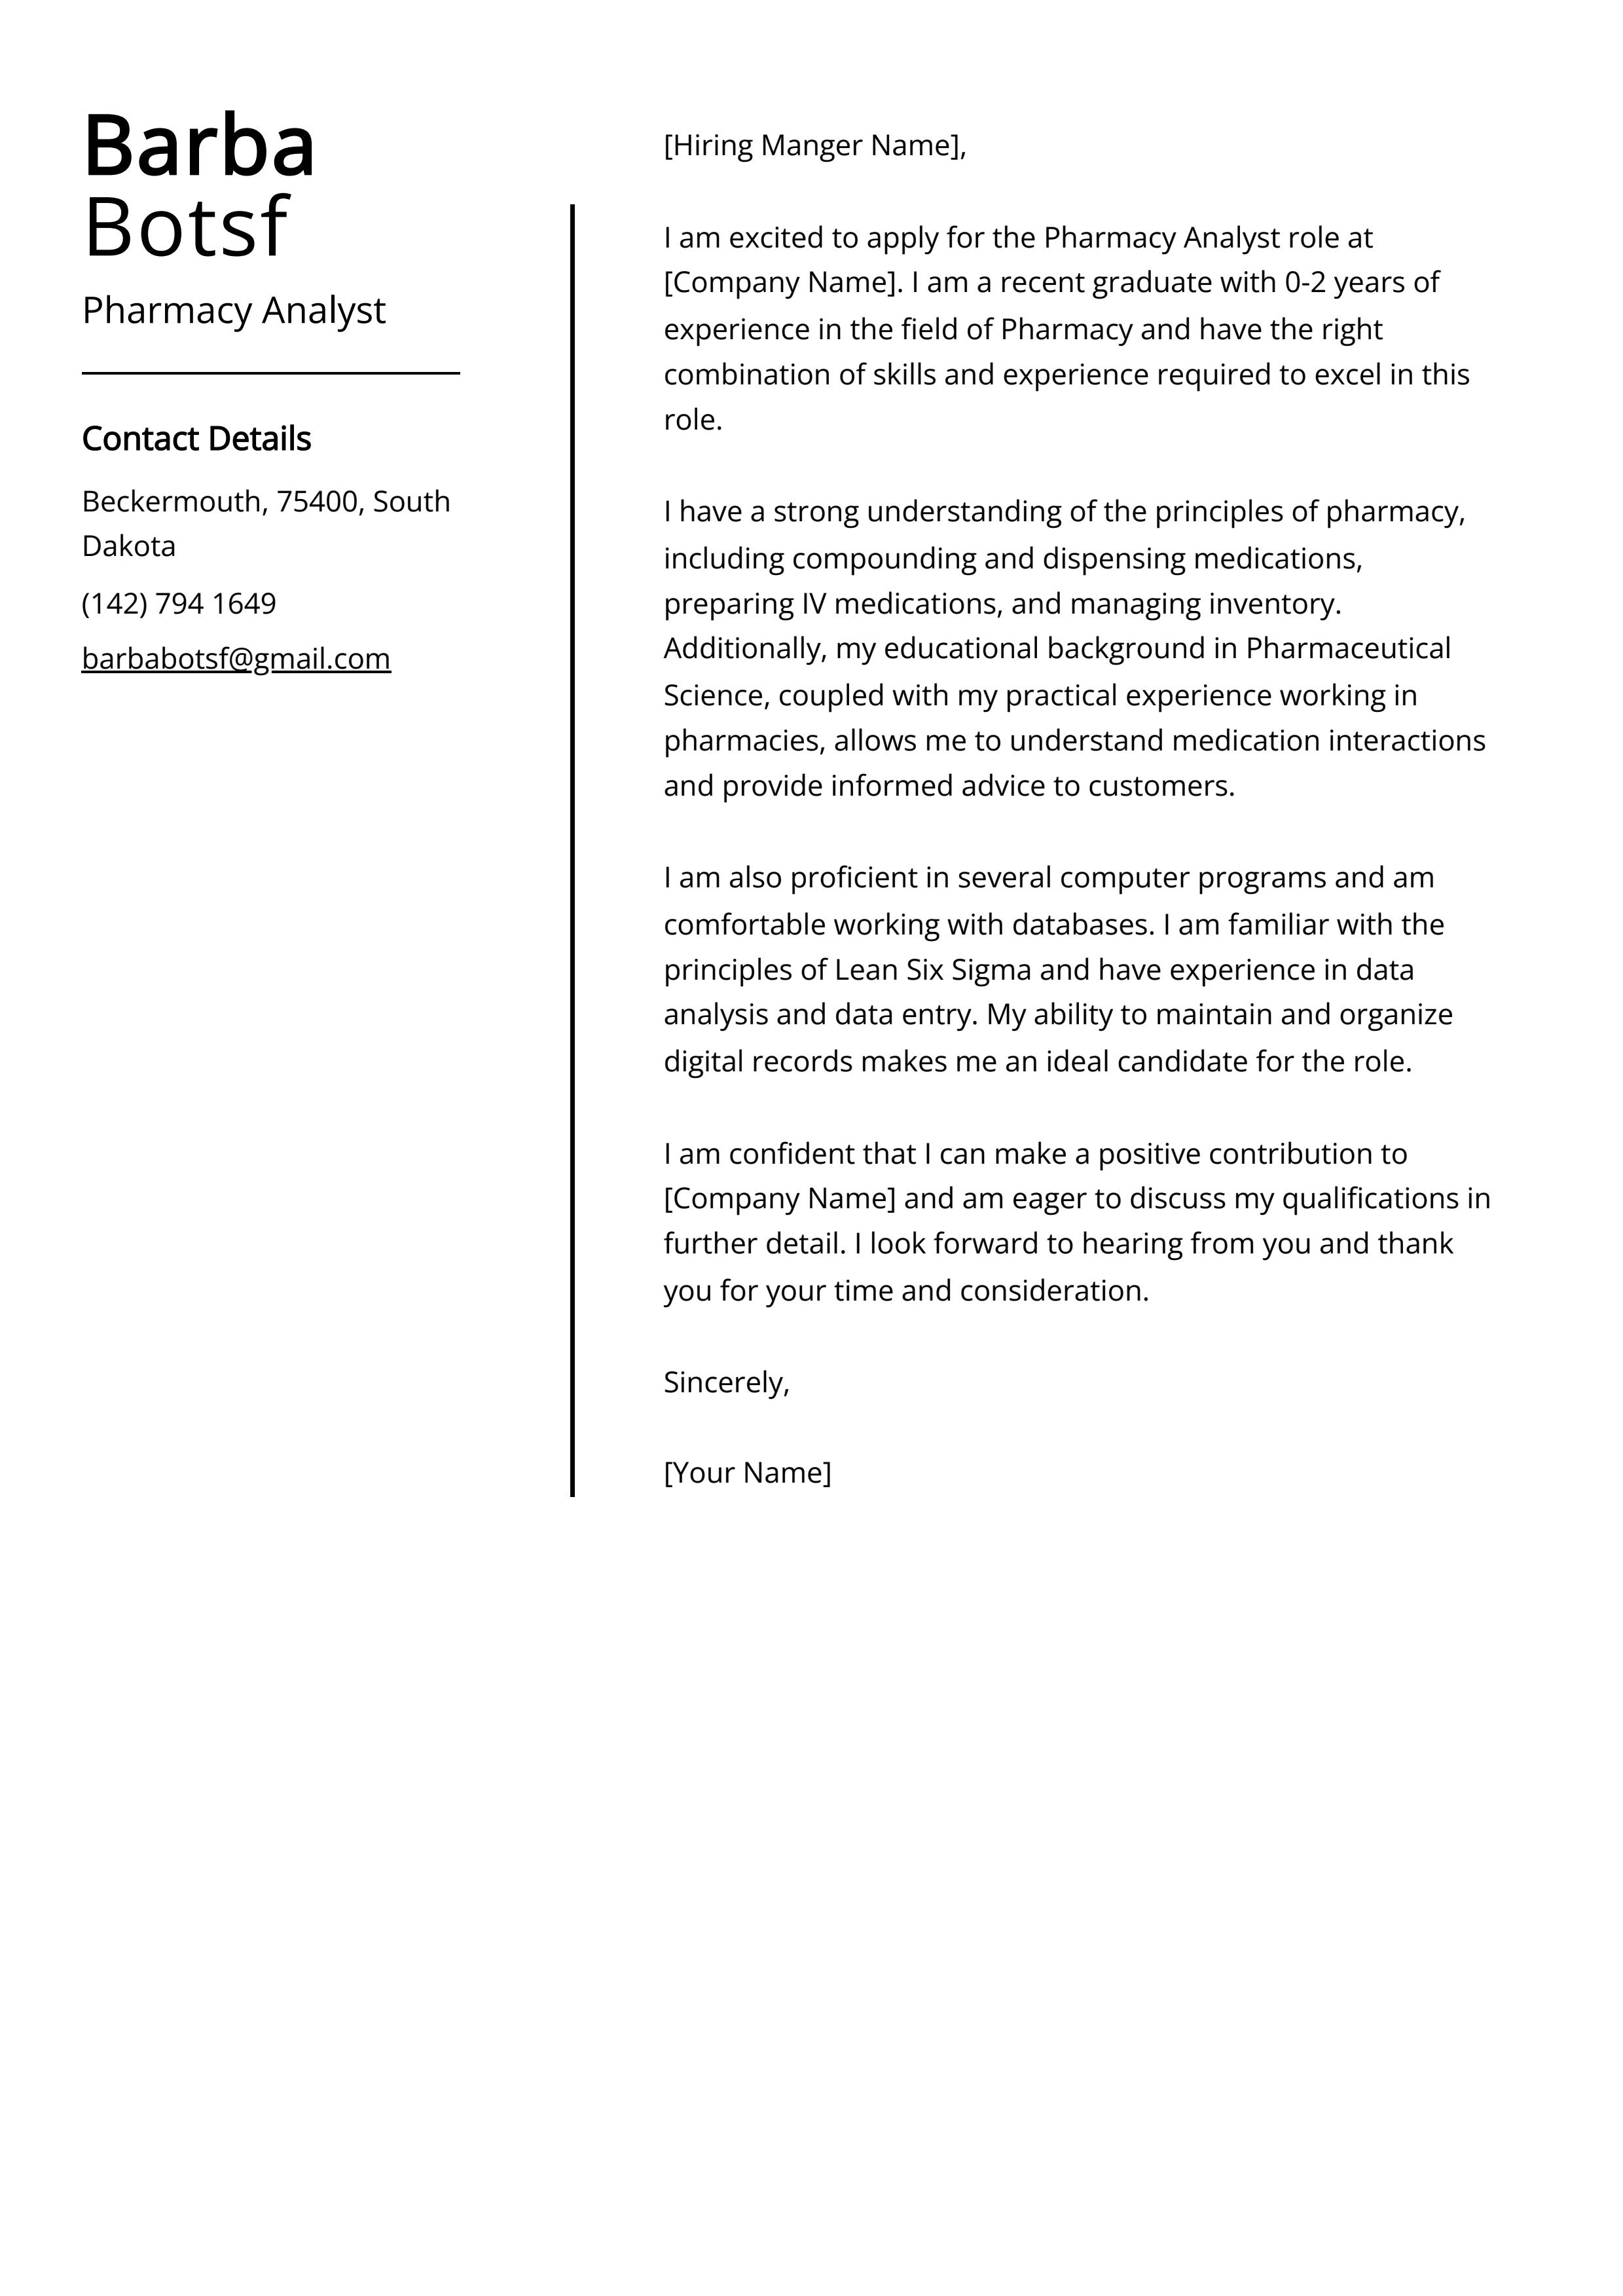 Pharmacy Analyst Cover Letter Example